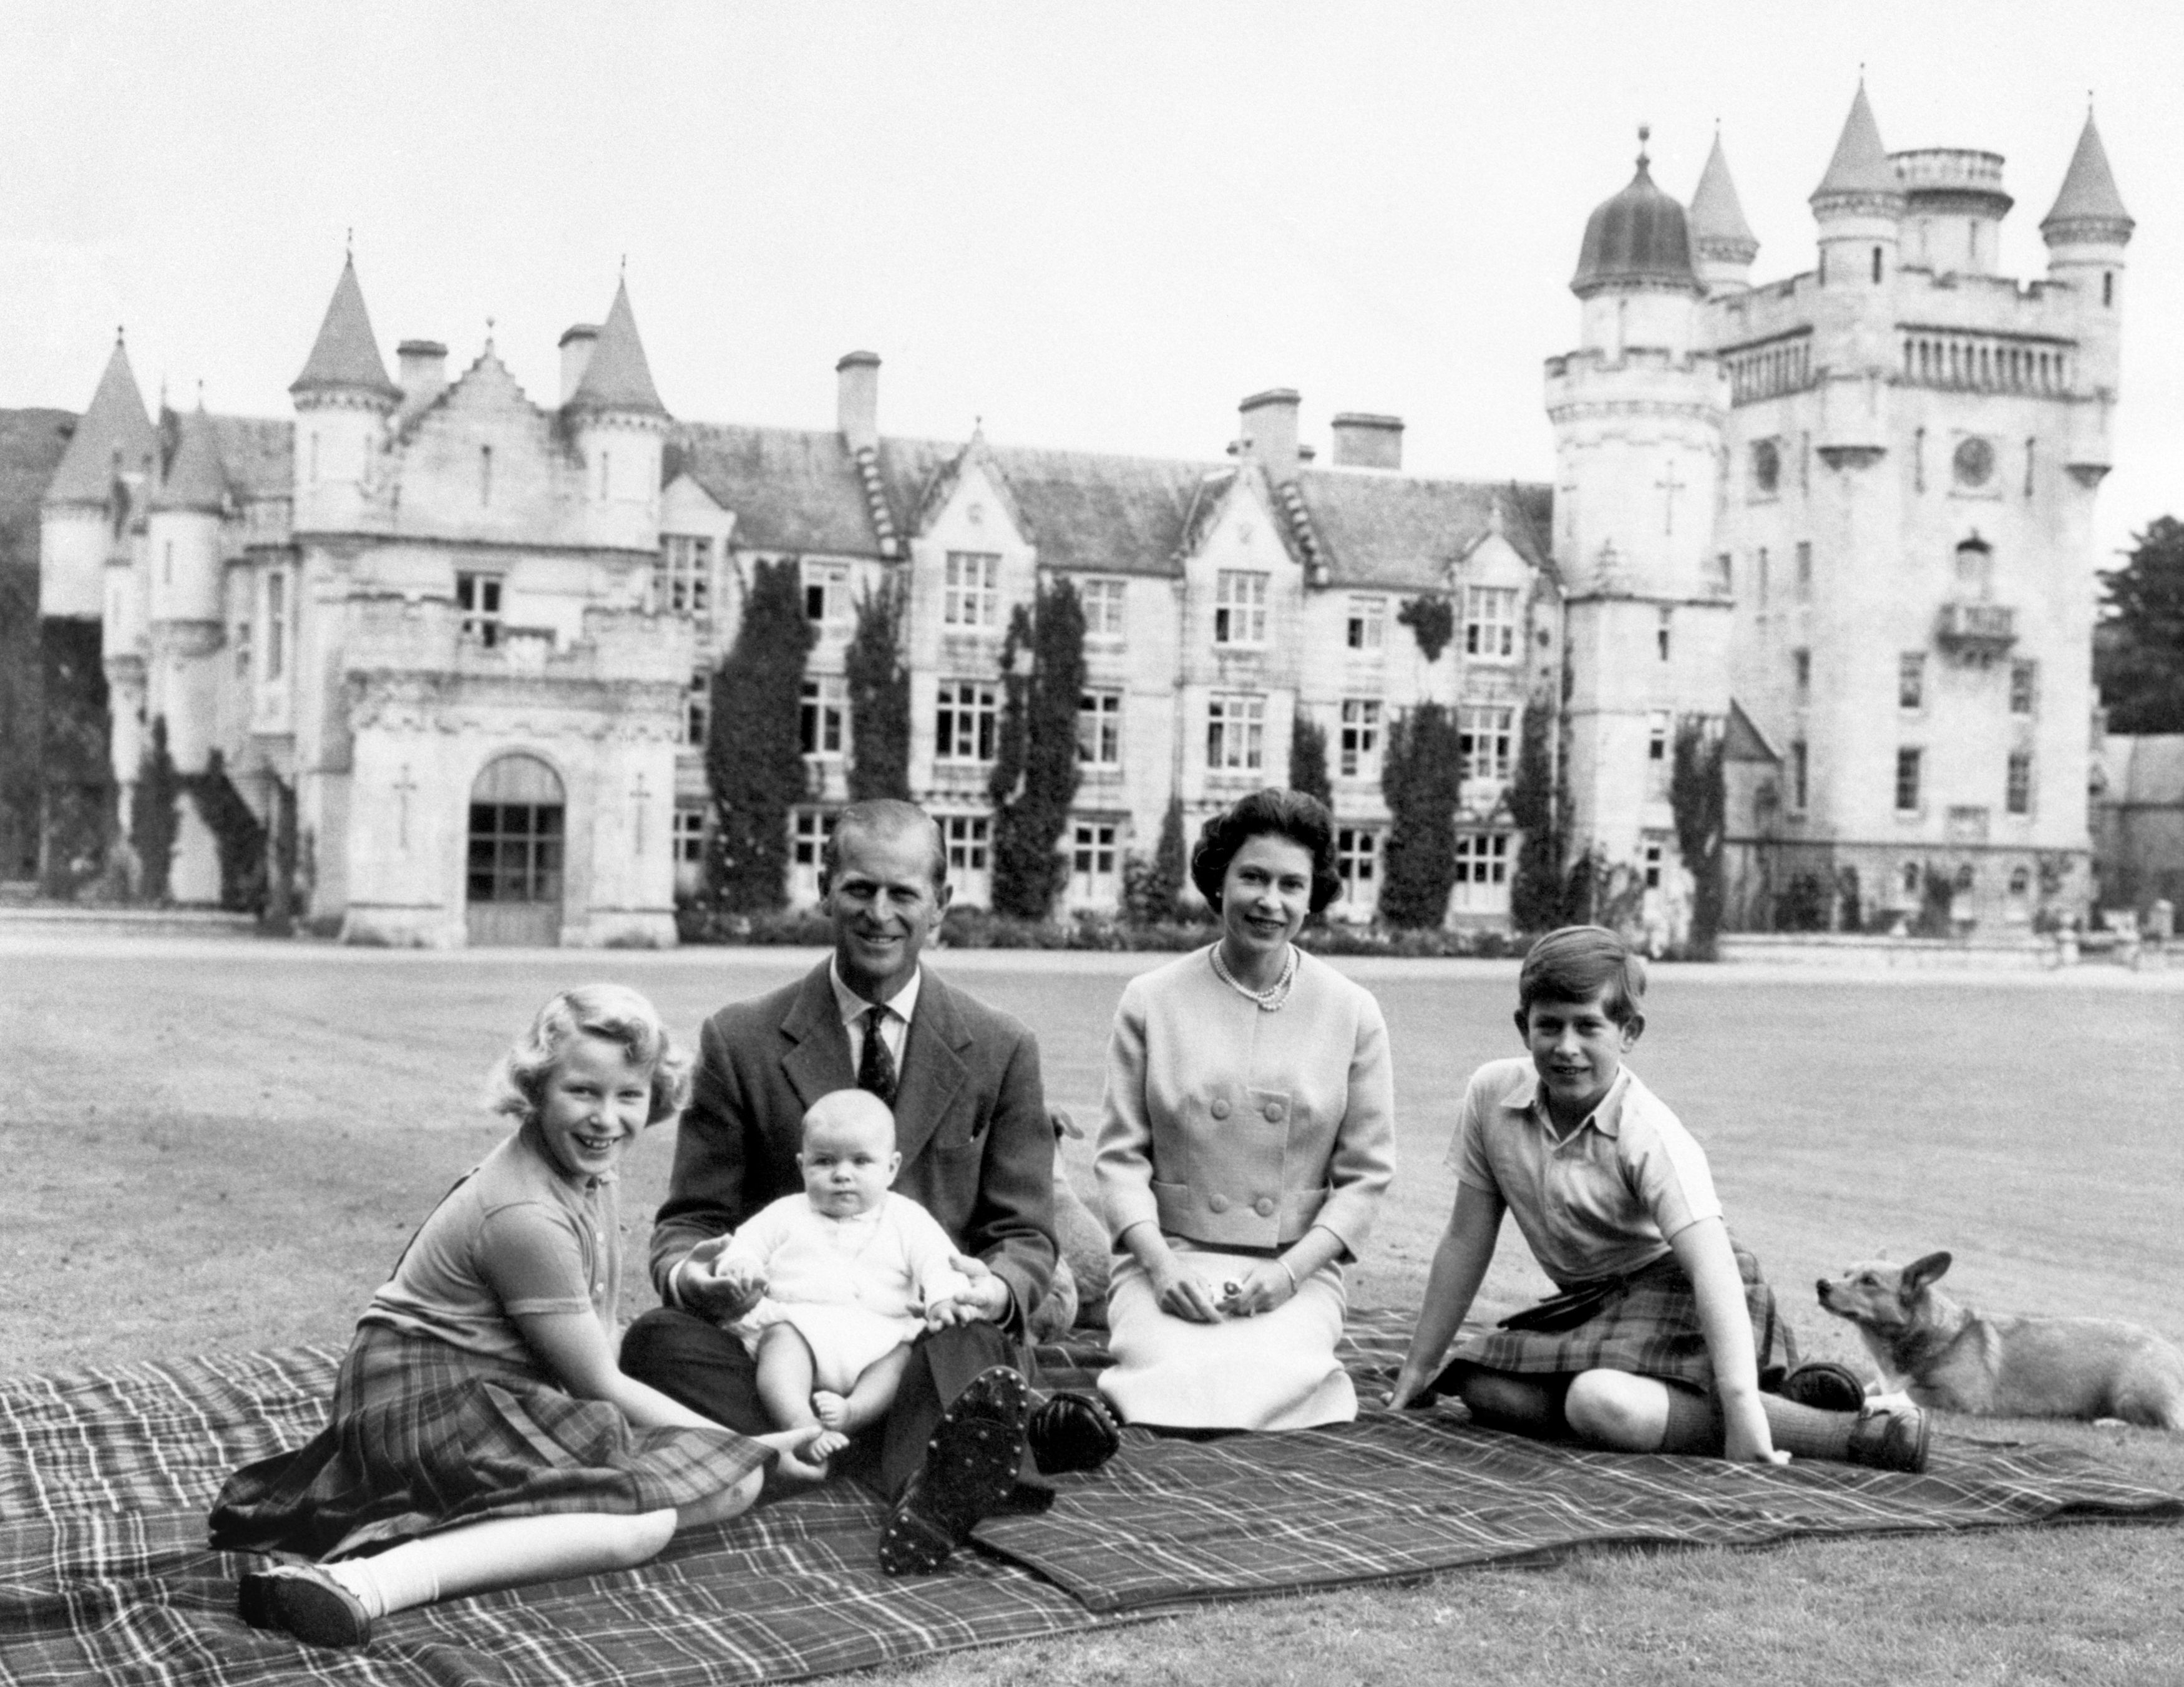 The Duke of Edinburgh and three of their children Princess Anne, Prince Charles and baby Prince Andrew, on his father's knees on the lawns at Balmoral.